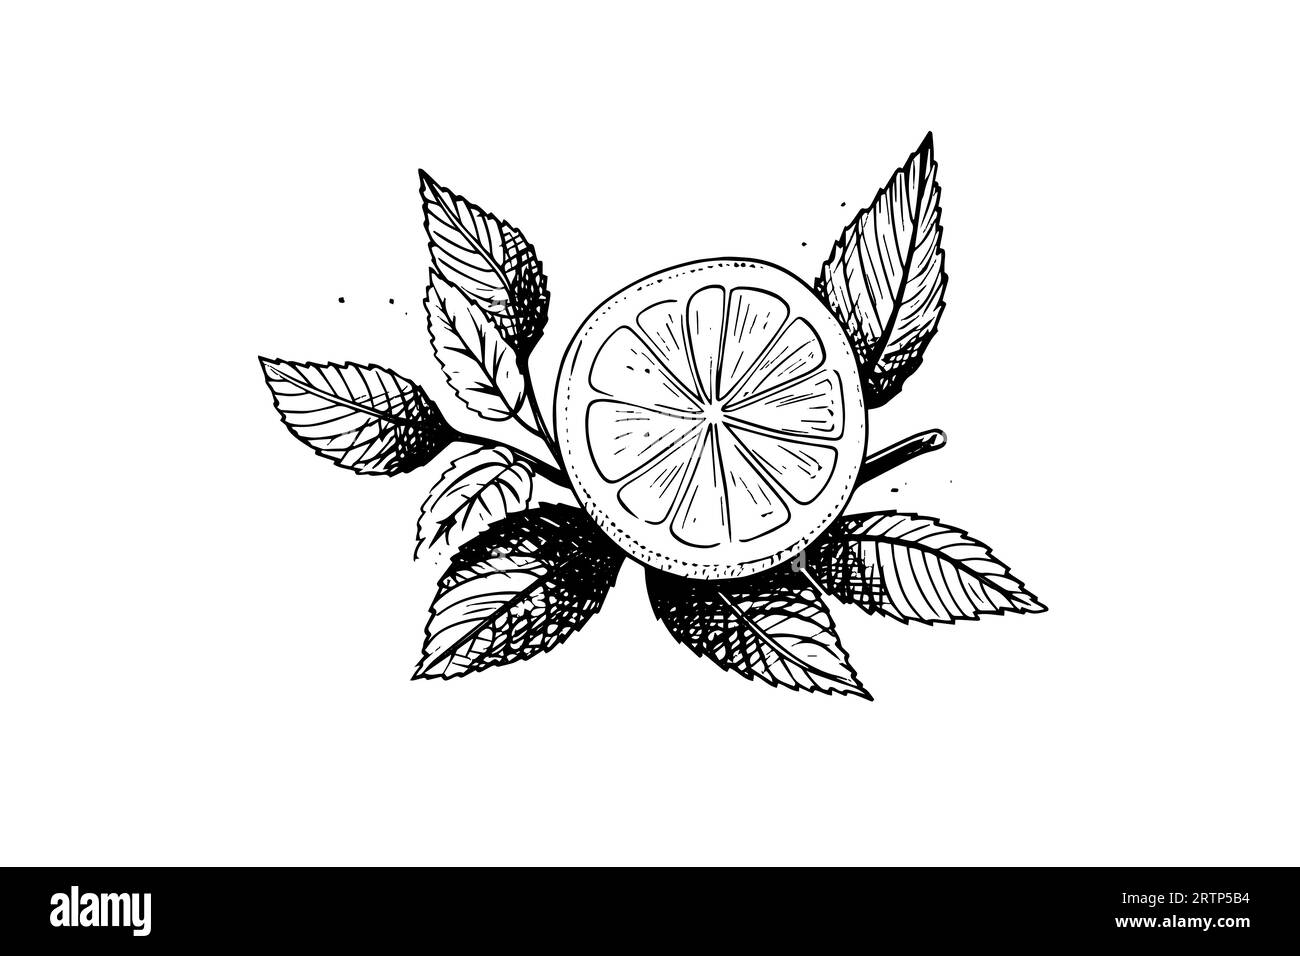 Lemons and mint hand drawn vector illustration. Whole fruit, sliced piece and leaves drawing. Stock Vector